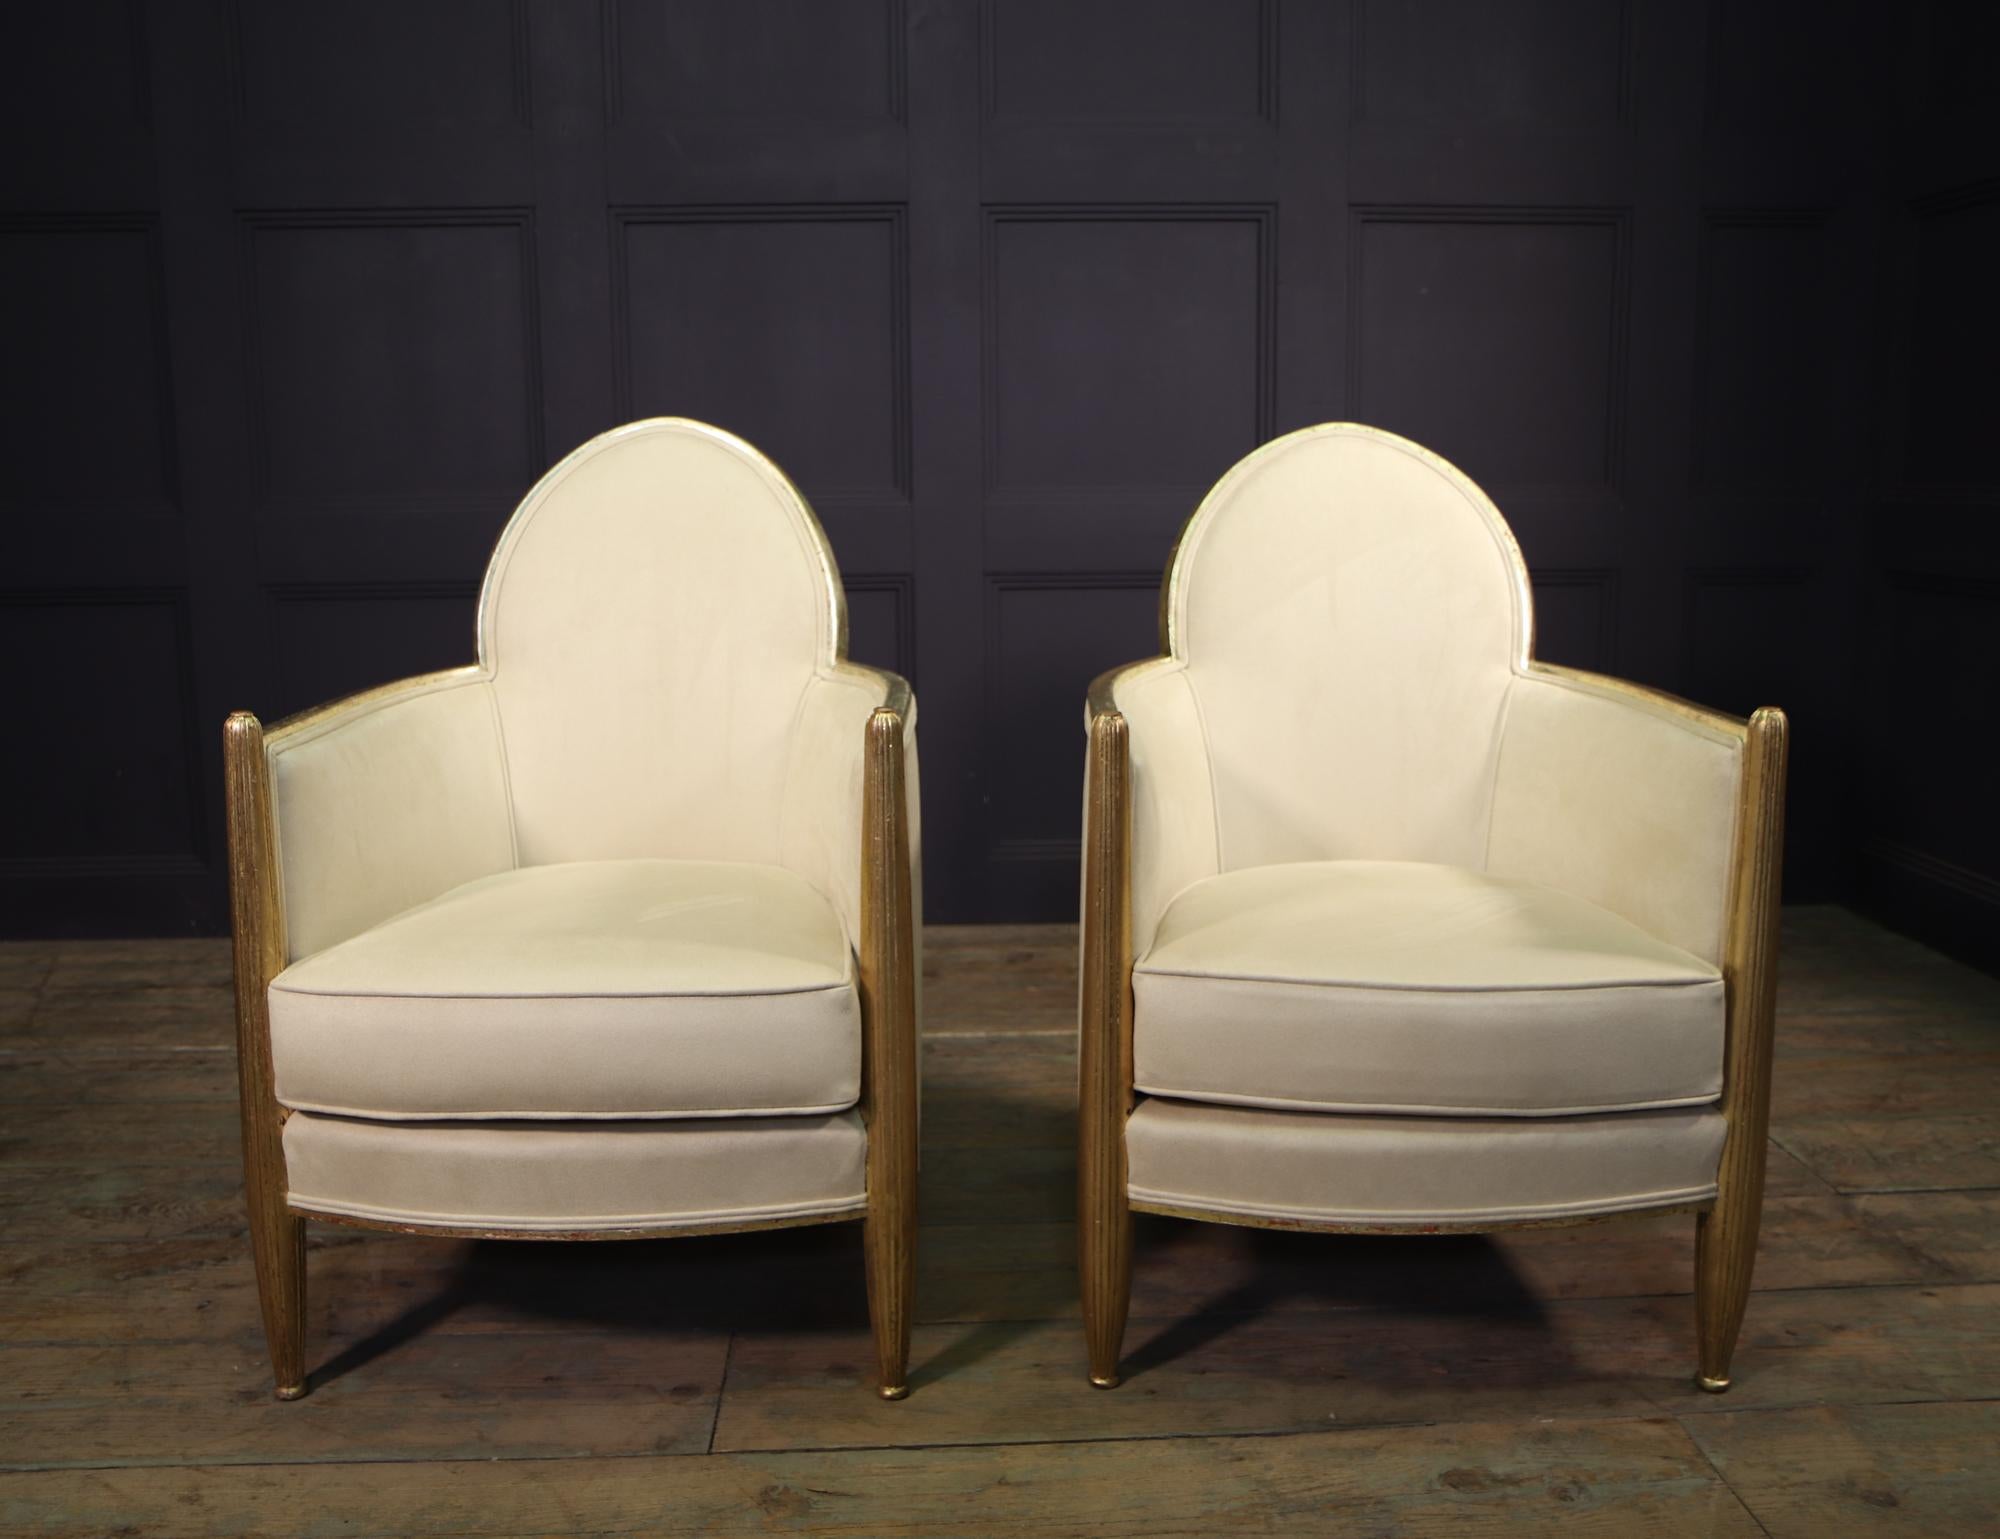 20th Century Pair of French Art Deco Armchairs in Parcel Gilt Wood